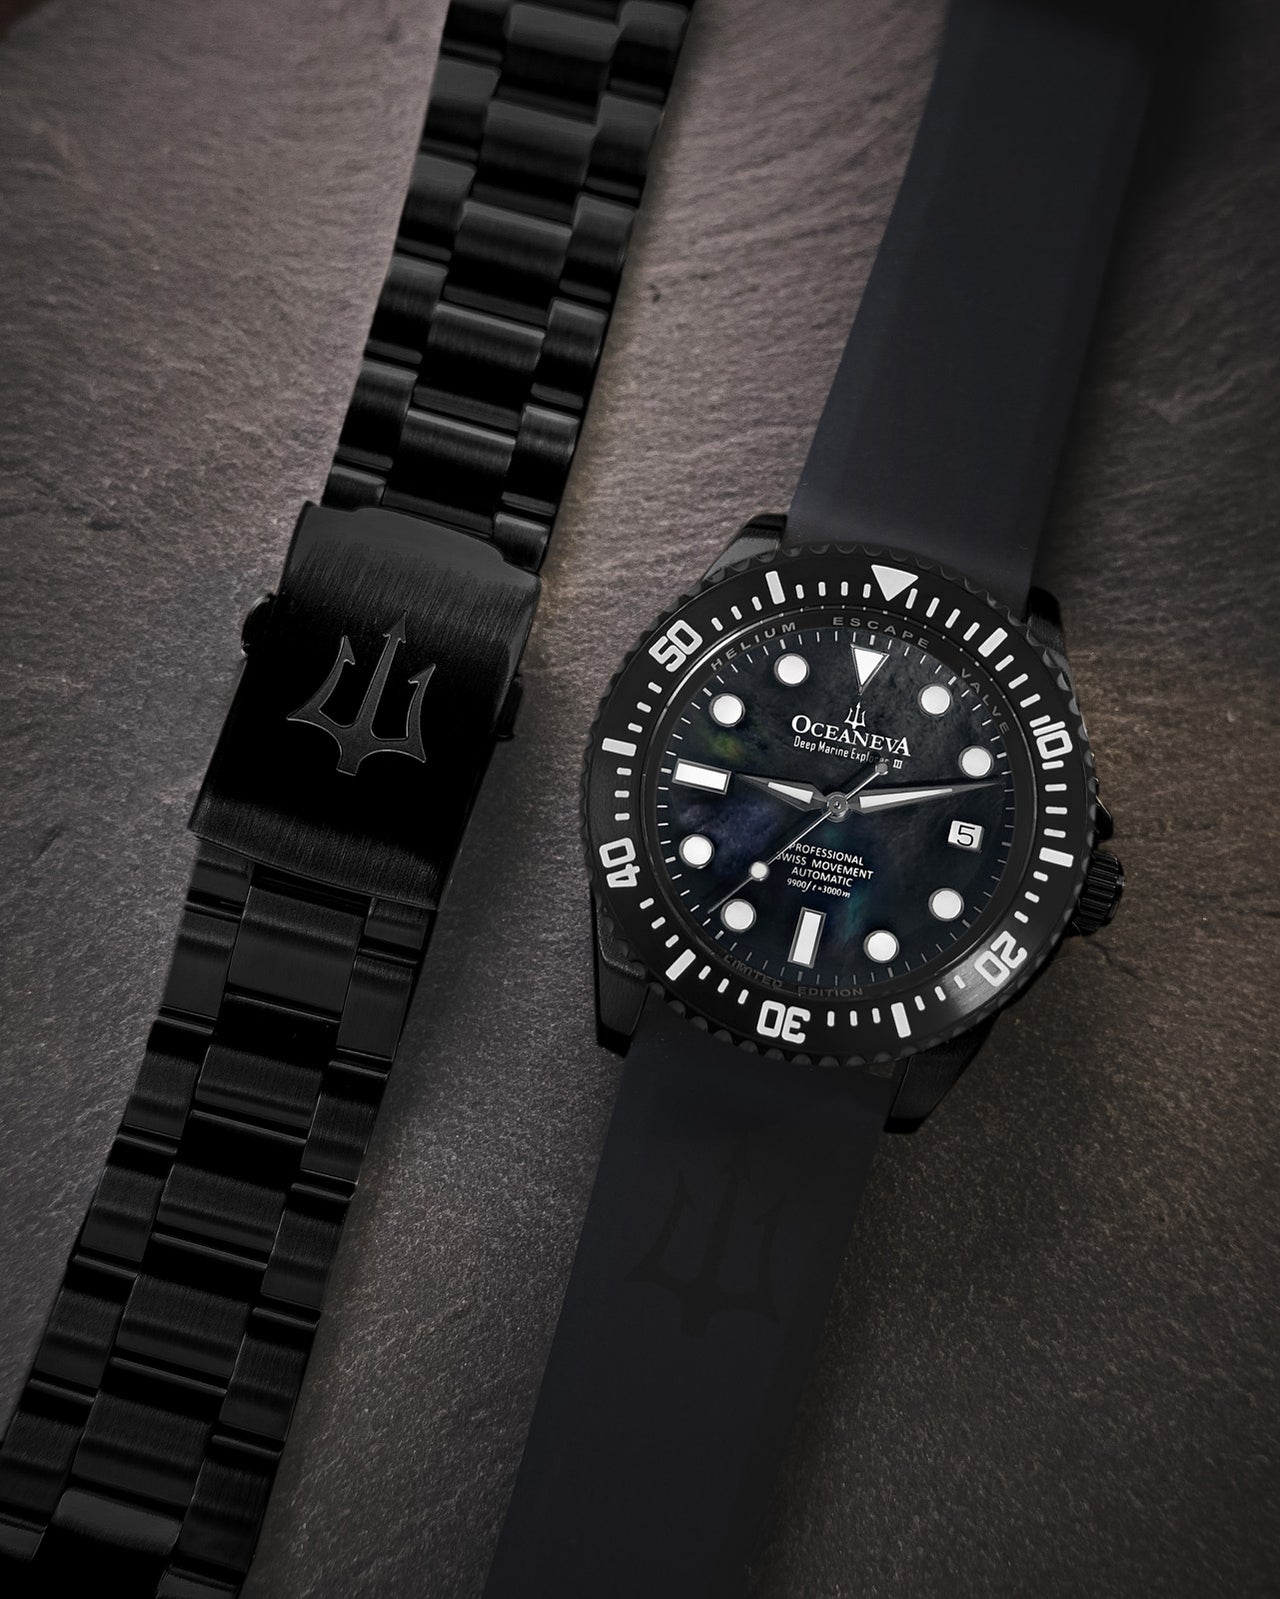 Oceaneva 3000M Dive Watch Black Mother of Pearl Front Pictured With Rubber Strap